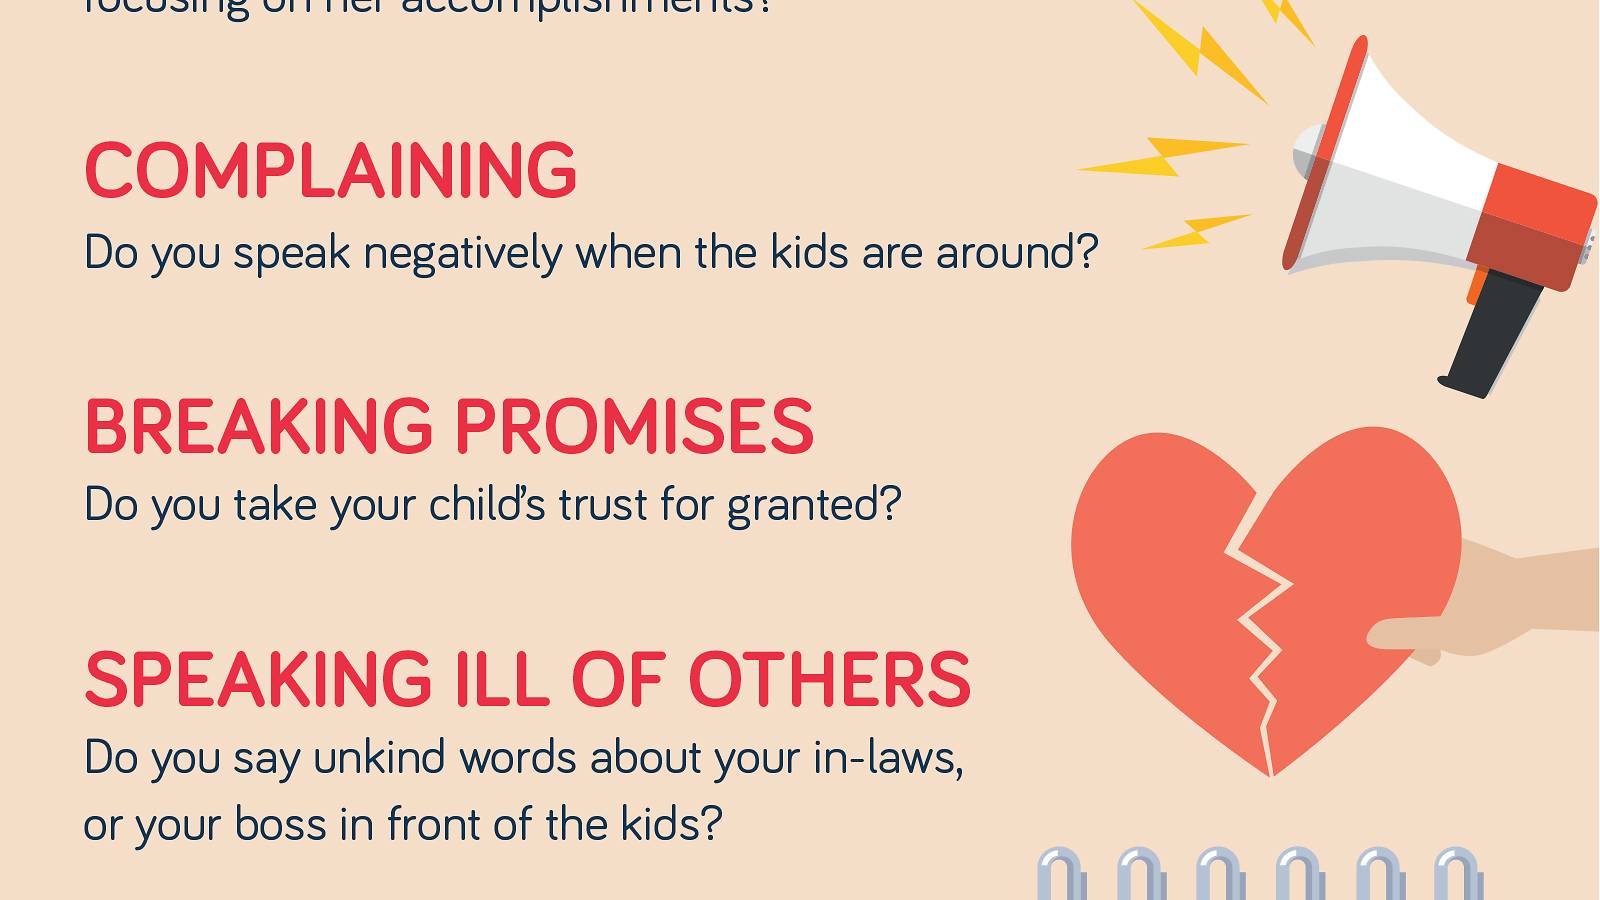 Parents-10 bad parenting habits to stop doing right now [Infographic]_02